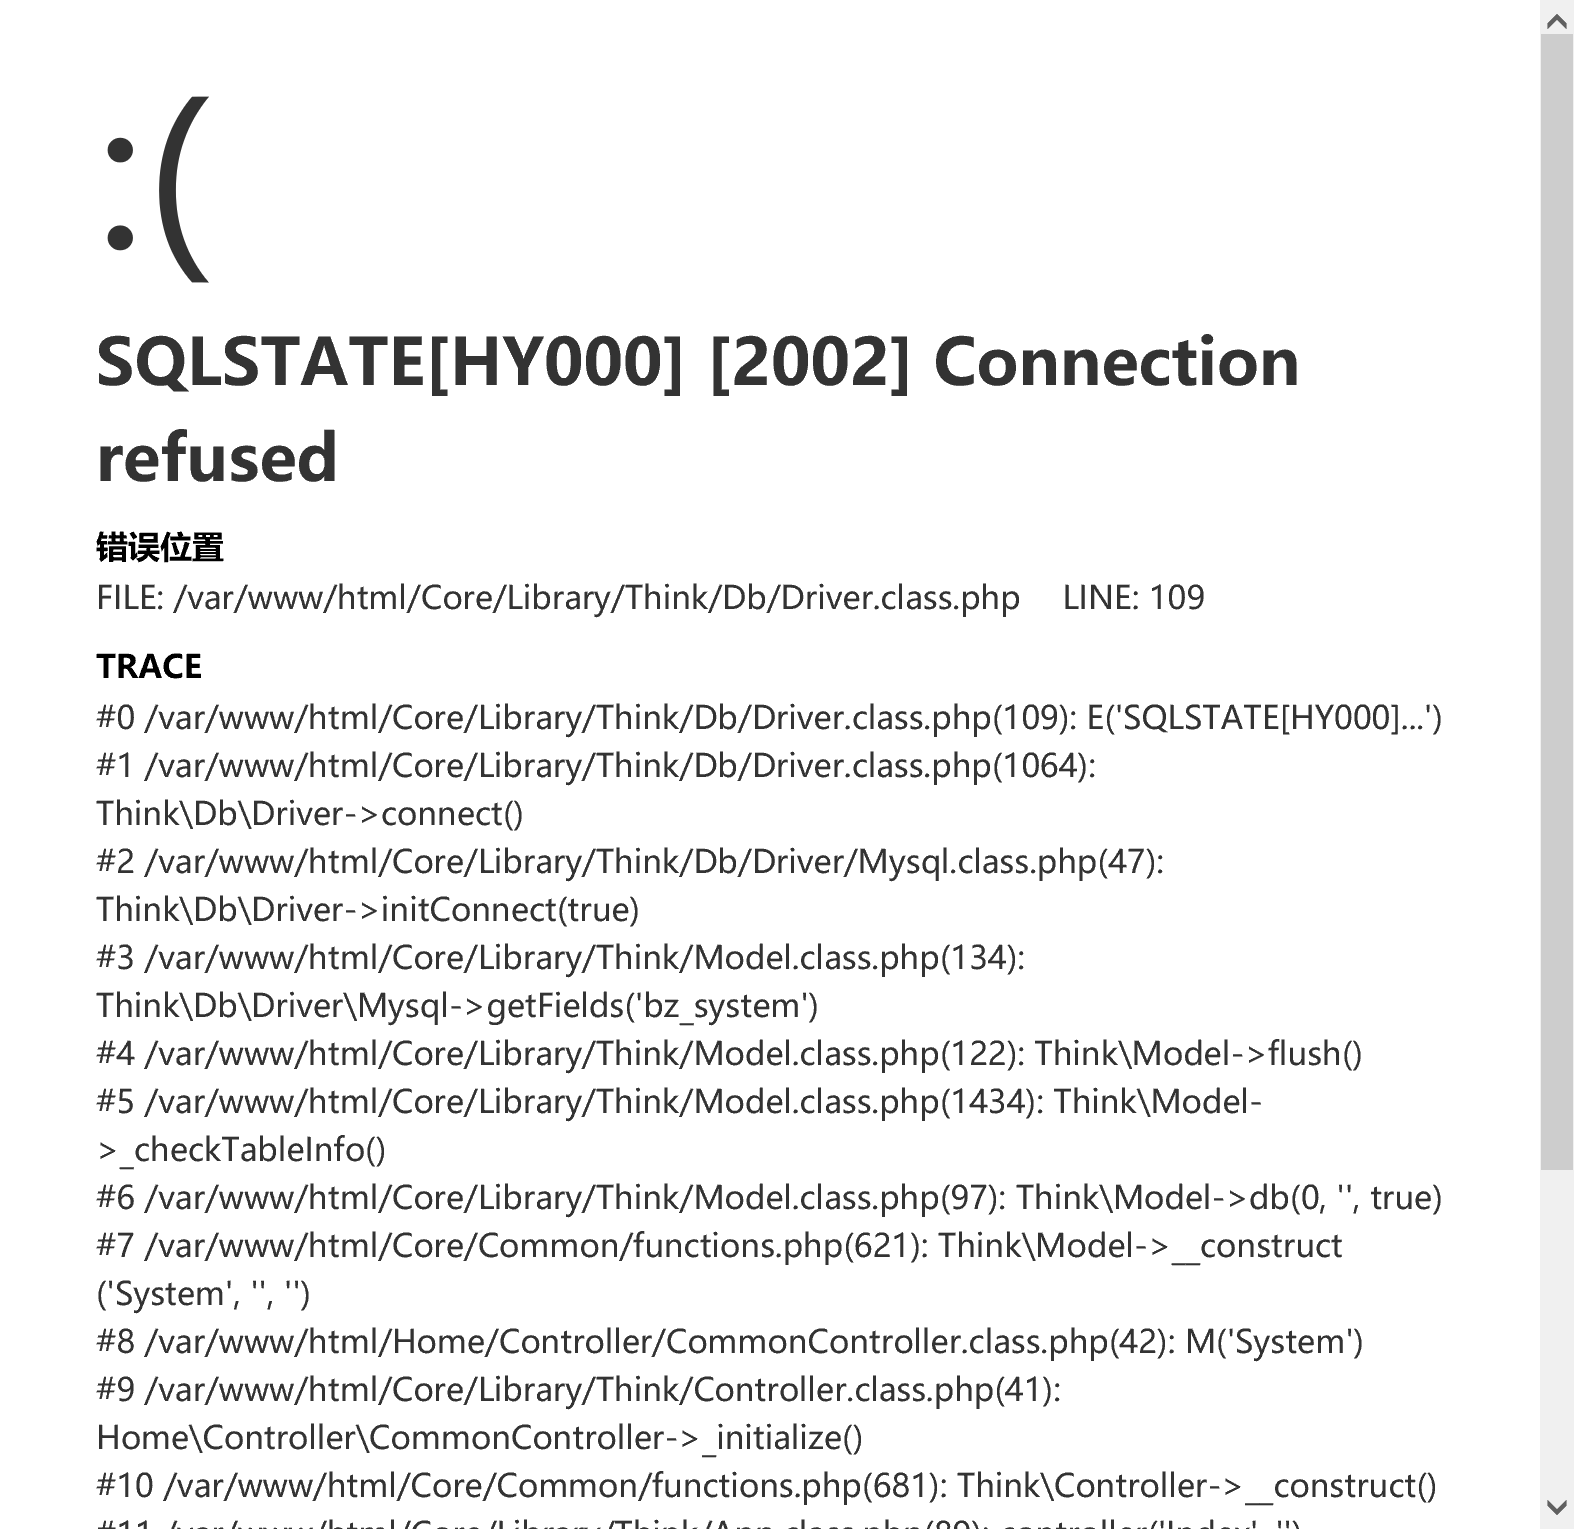 SQLSTATE[HY000] [2002] Connection refused